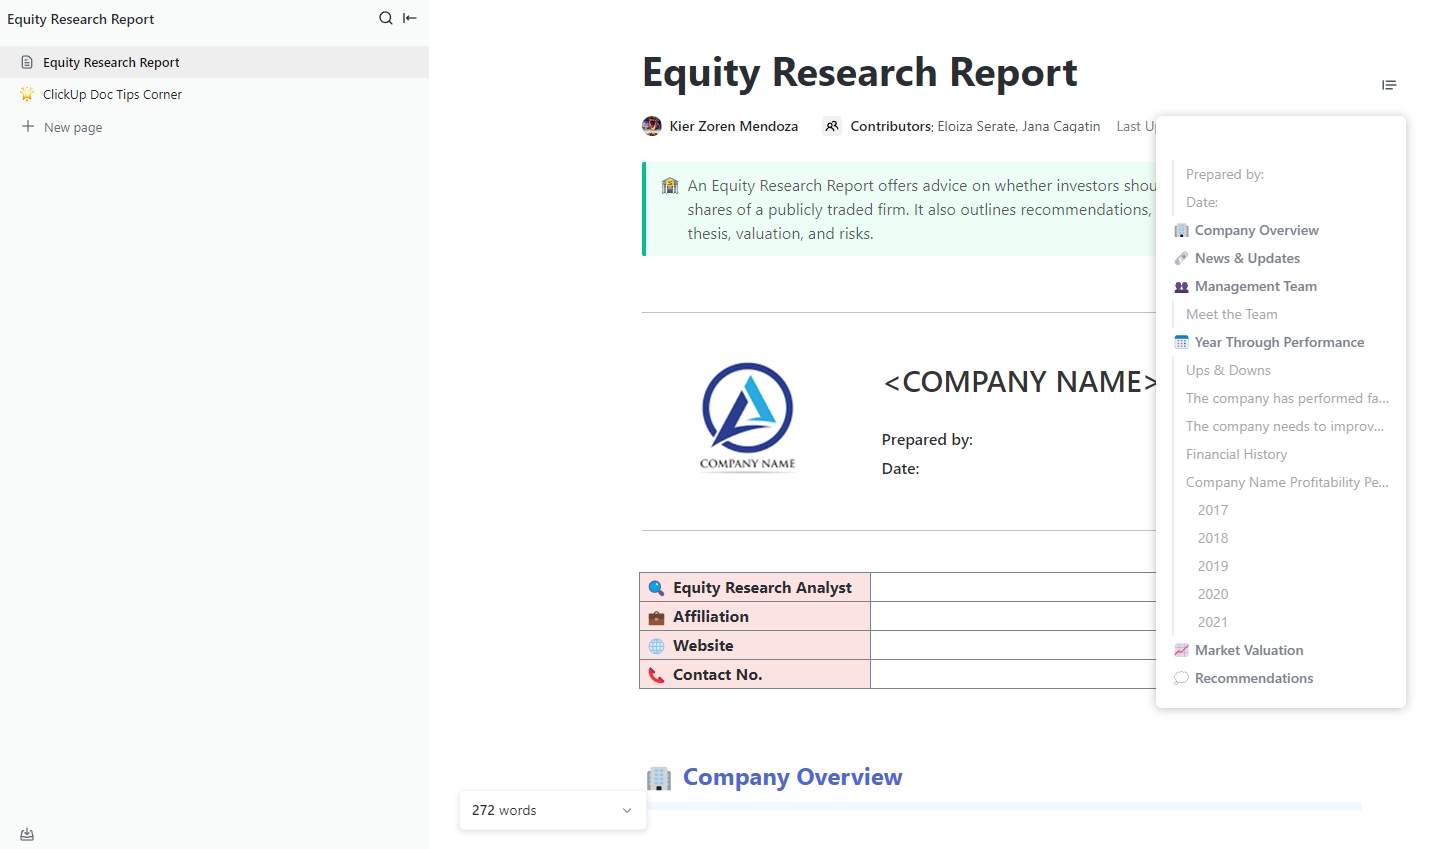 A document created by an equity research analyst called an Equity Research Report frequently offers advice on whether investors should purchase, hold, or sell shares of a publicly traded firm. An analyst outlines their recommendation, target price, investment thesis, valuation, and risks in an equities research report.